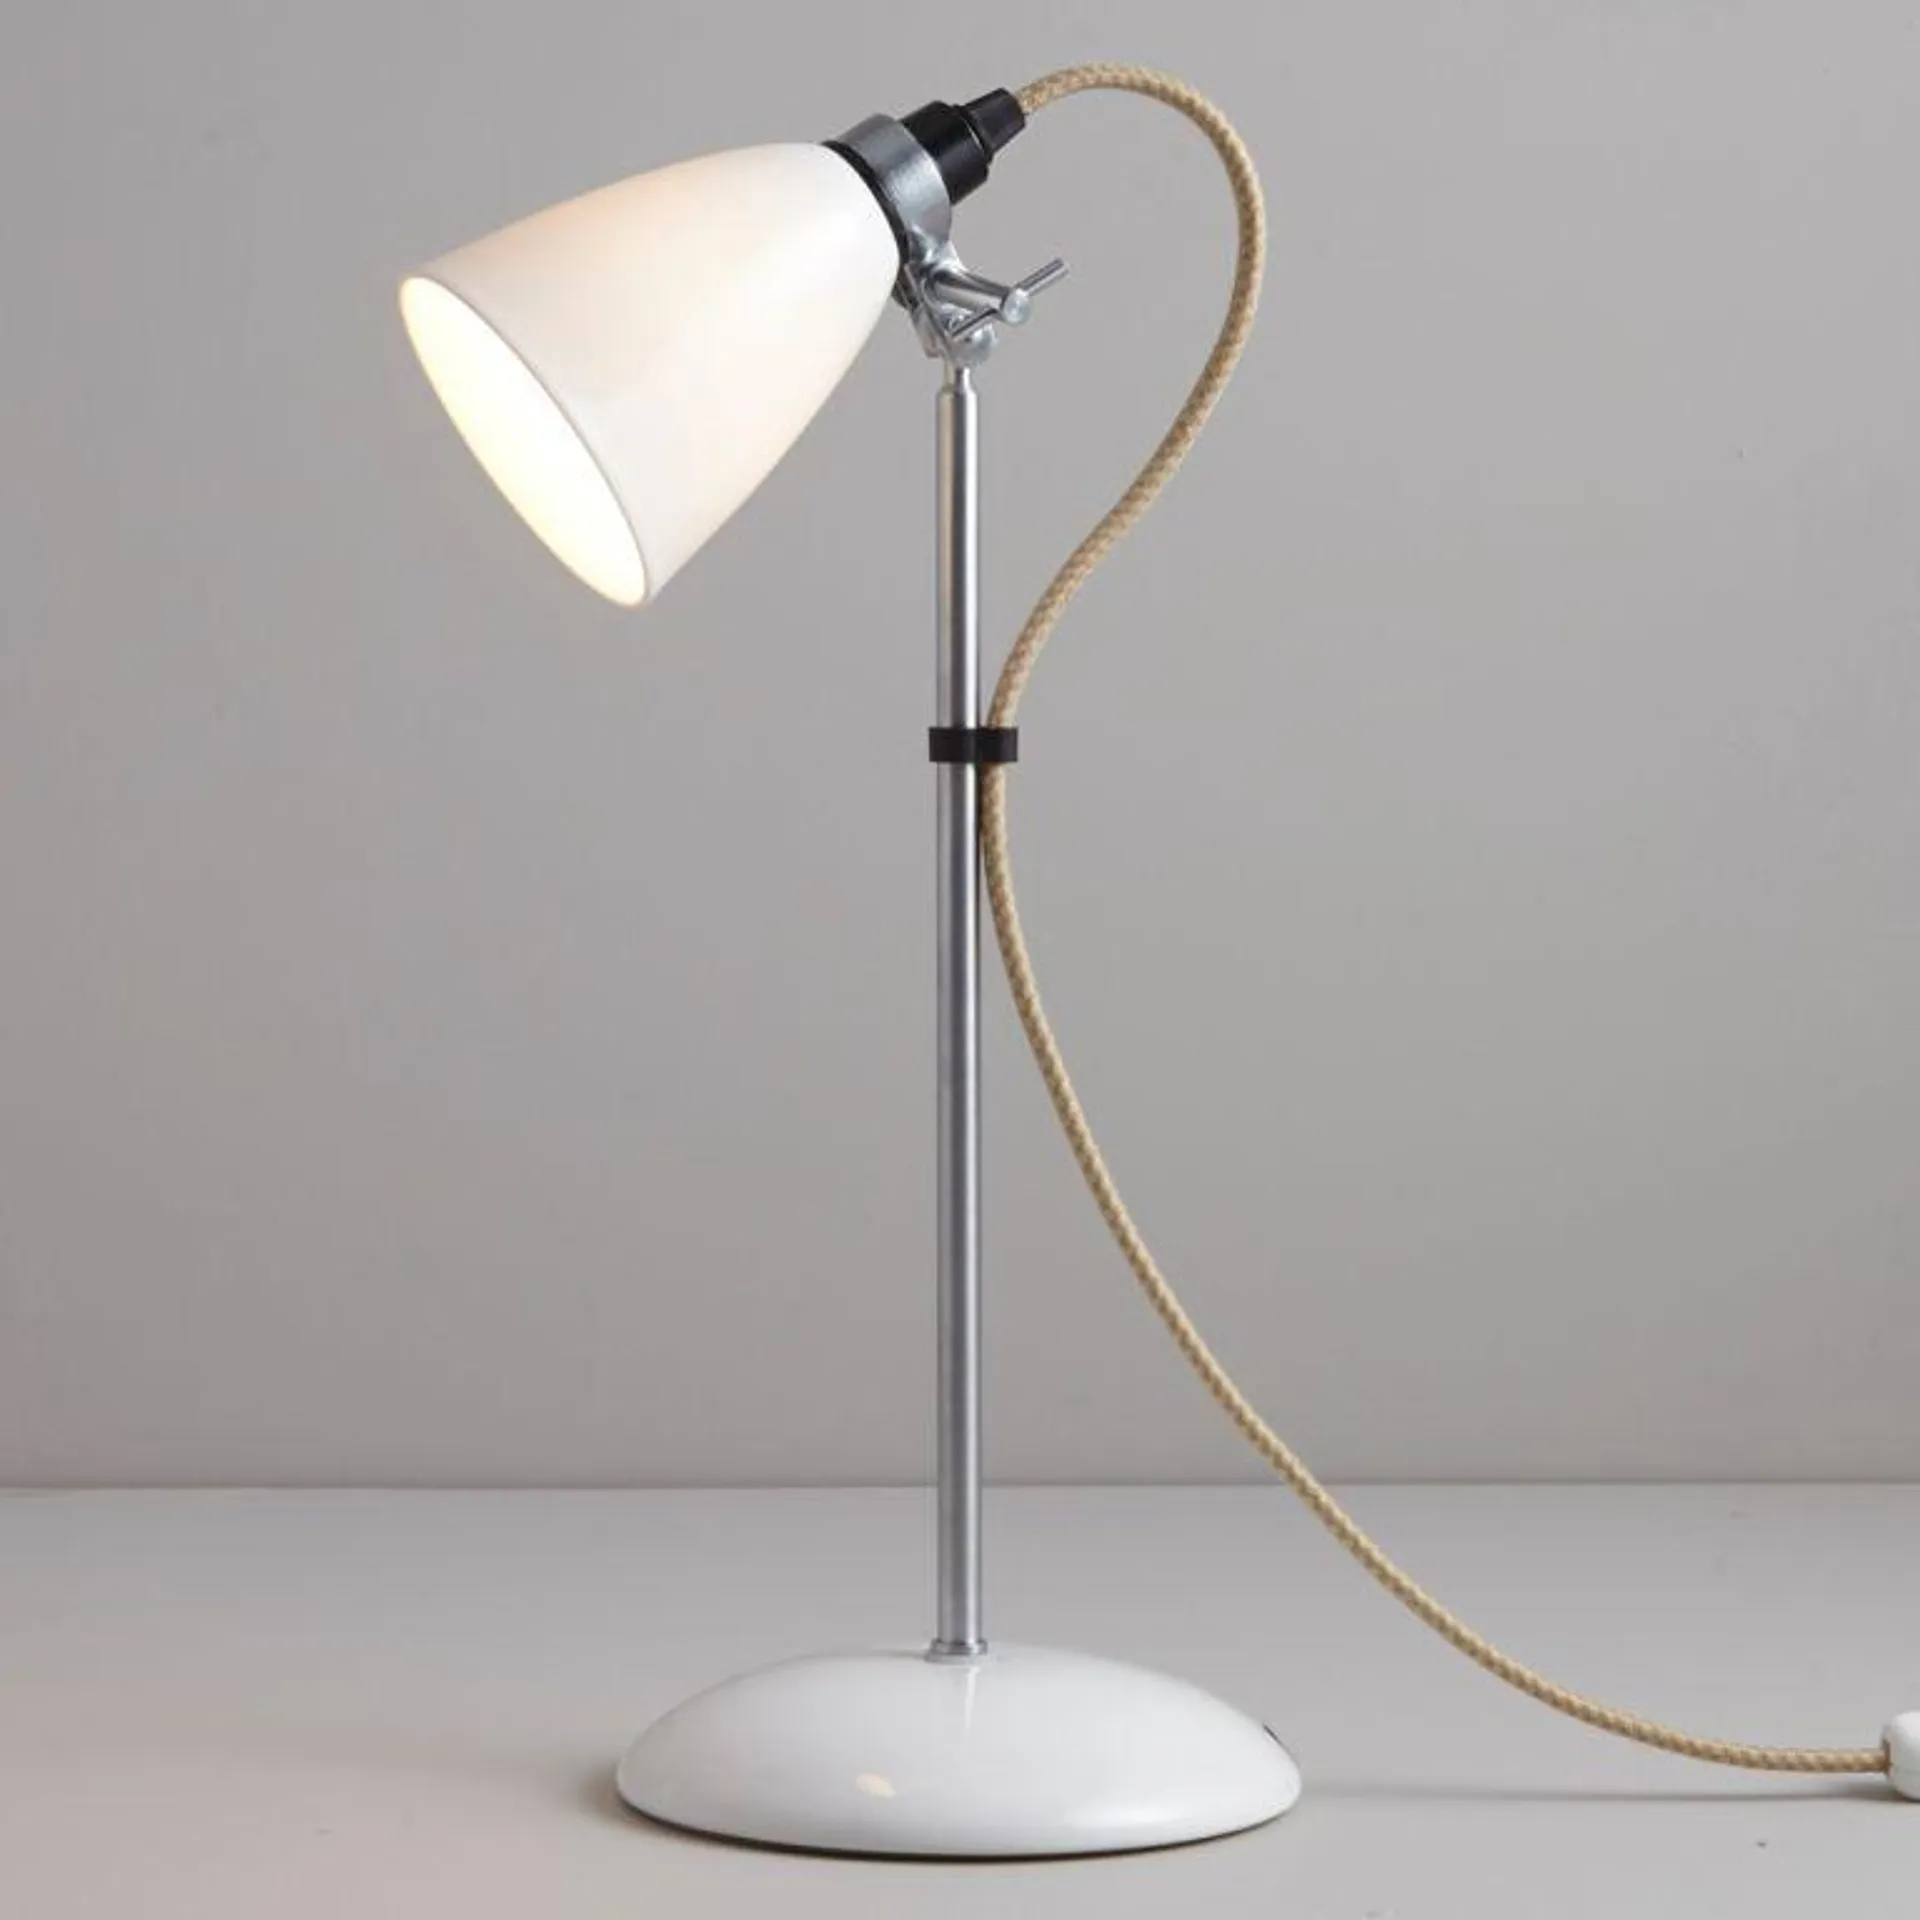 Hector Small Dome Table Lamp